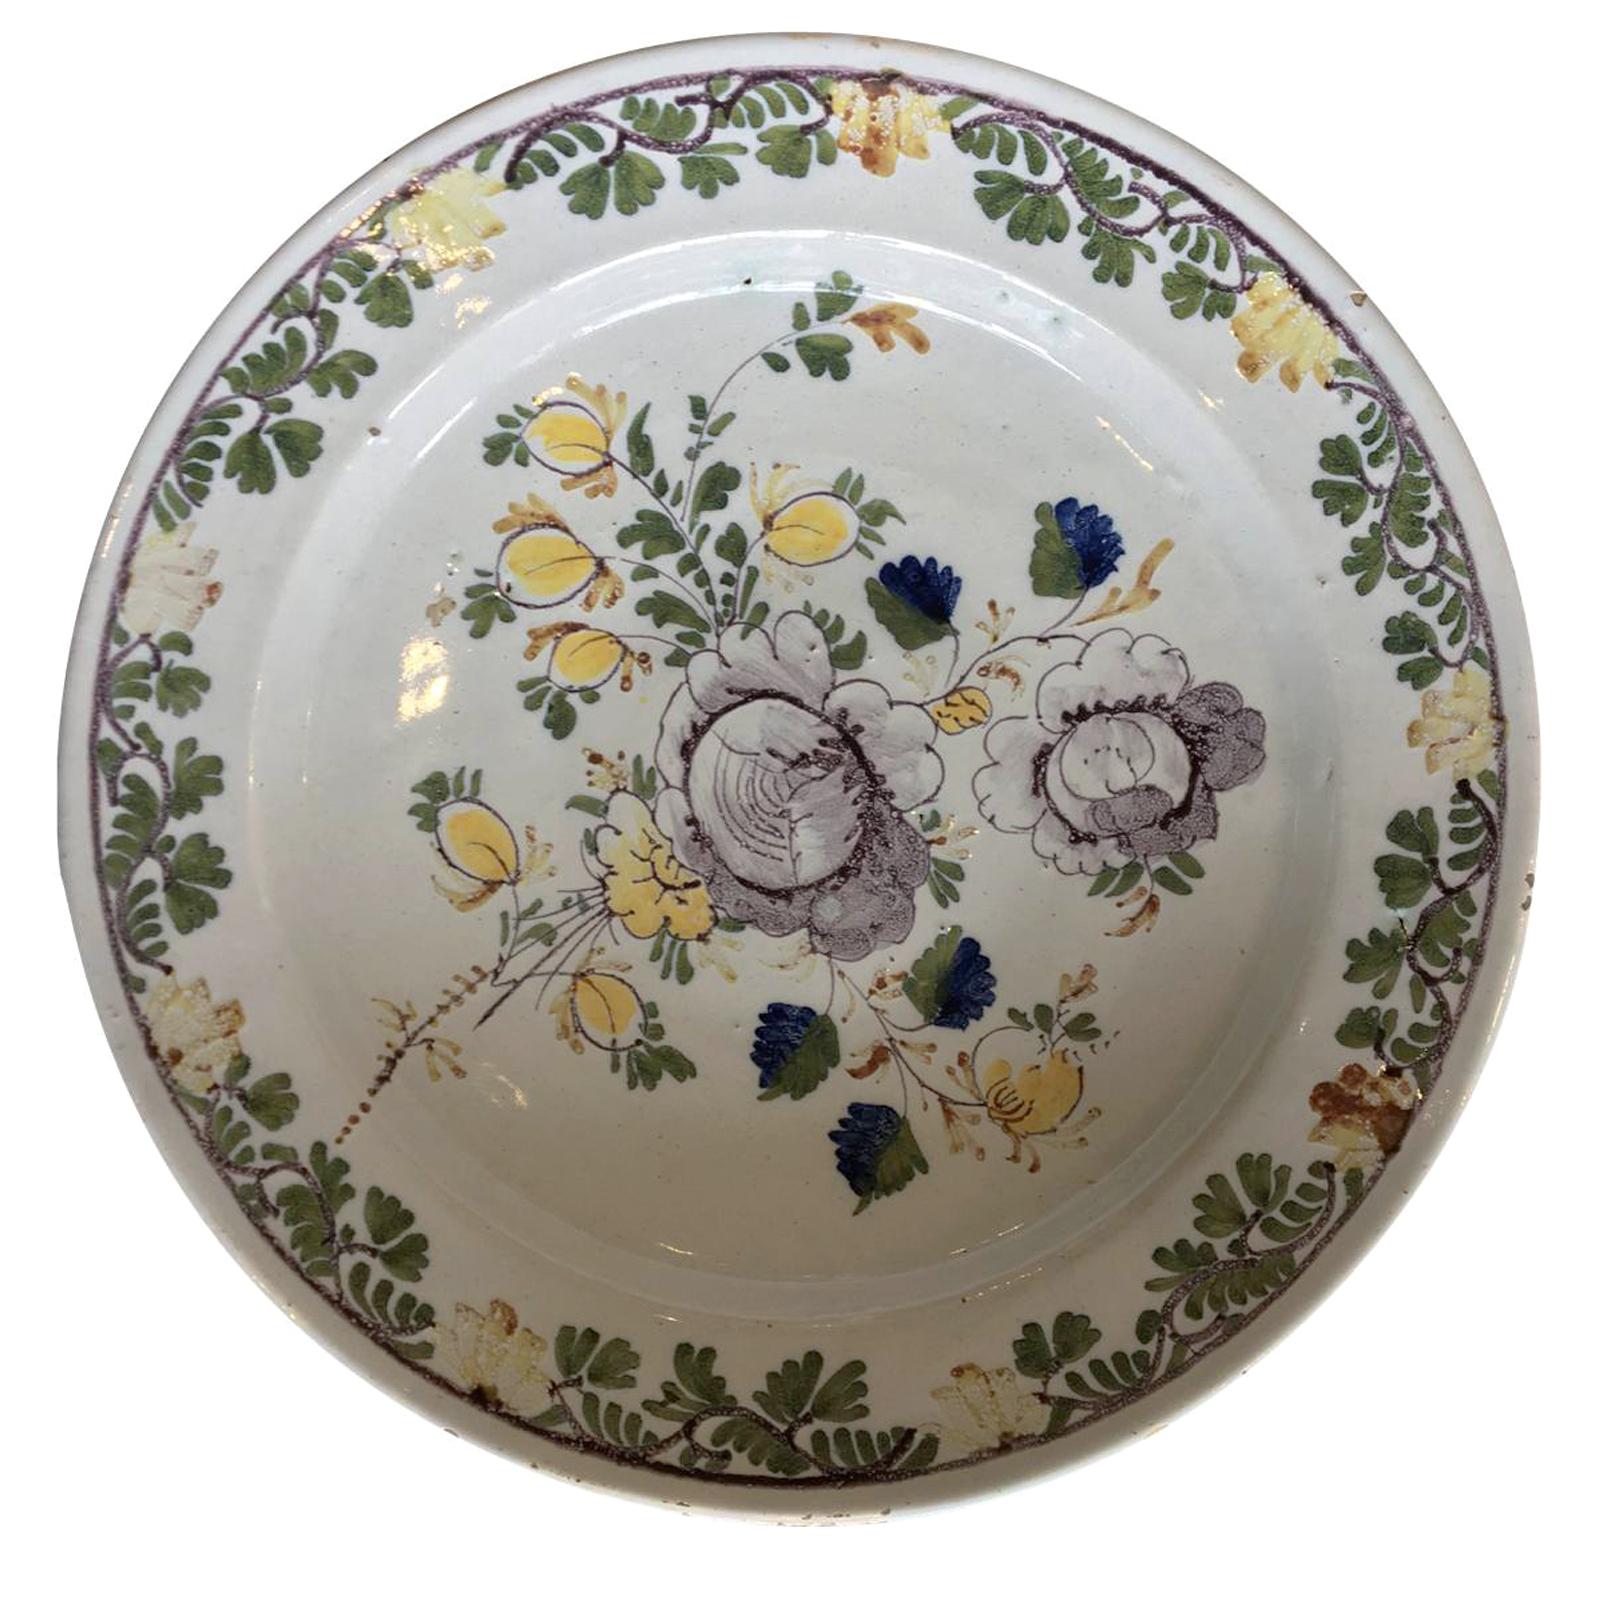 Dutch Delft Floral Polychrome Charger, 18th Century